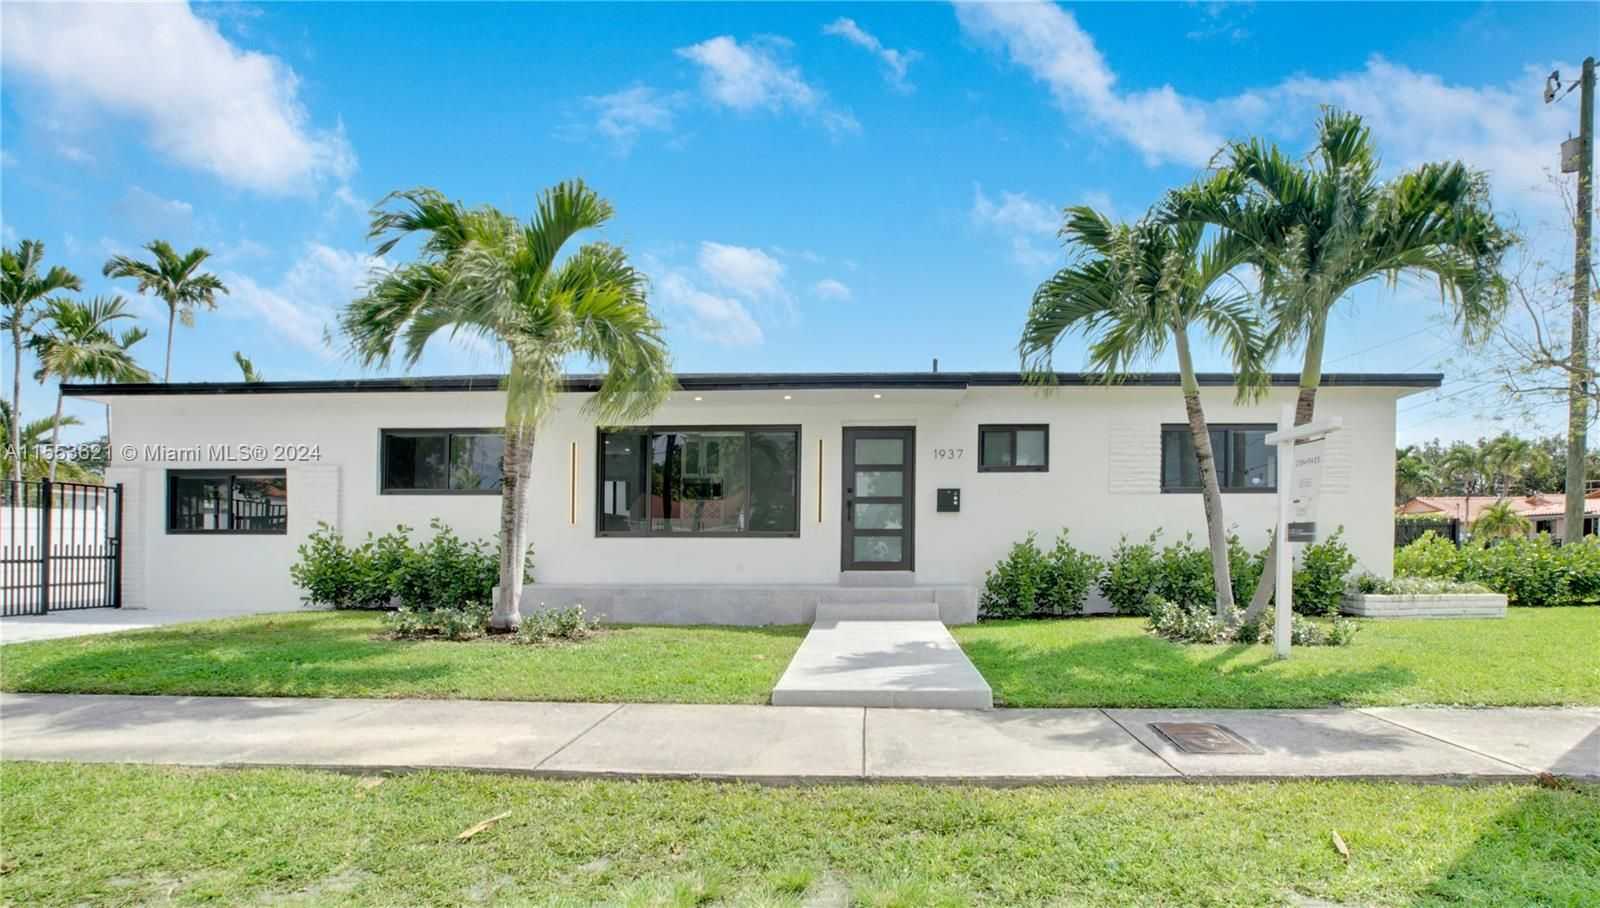 1937 SW 16 Ave-1